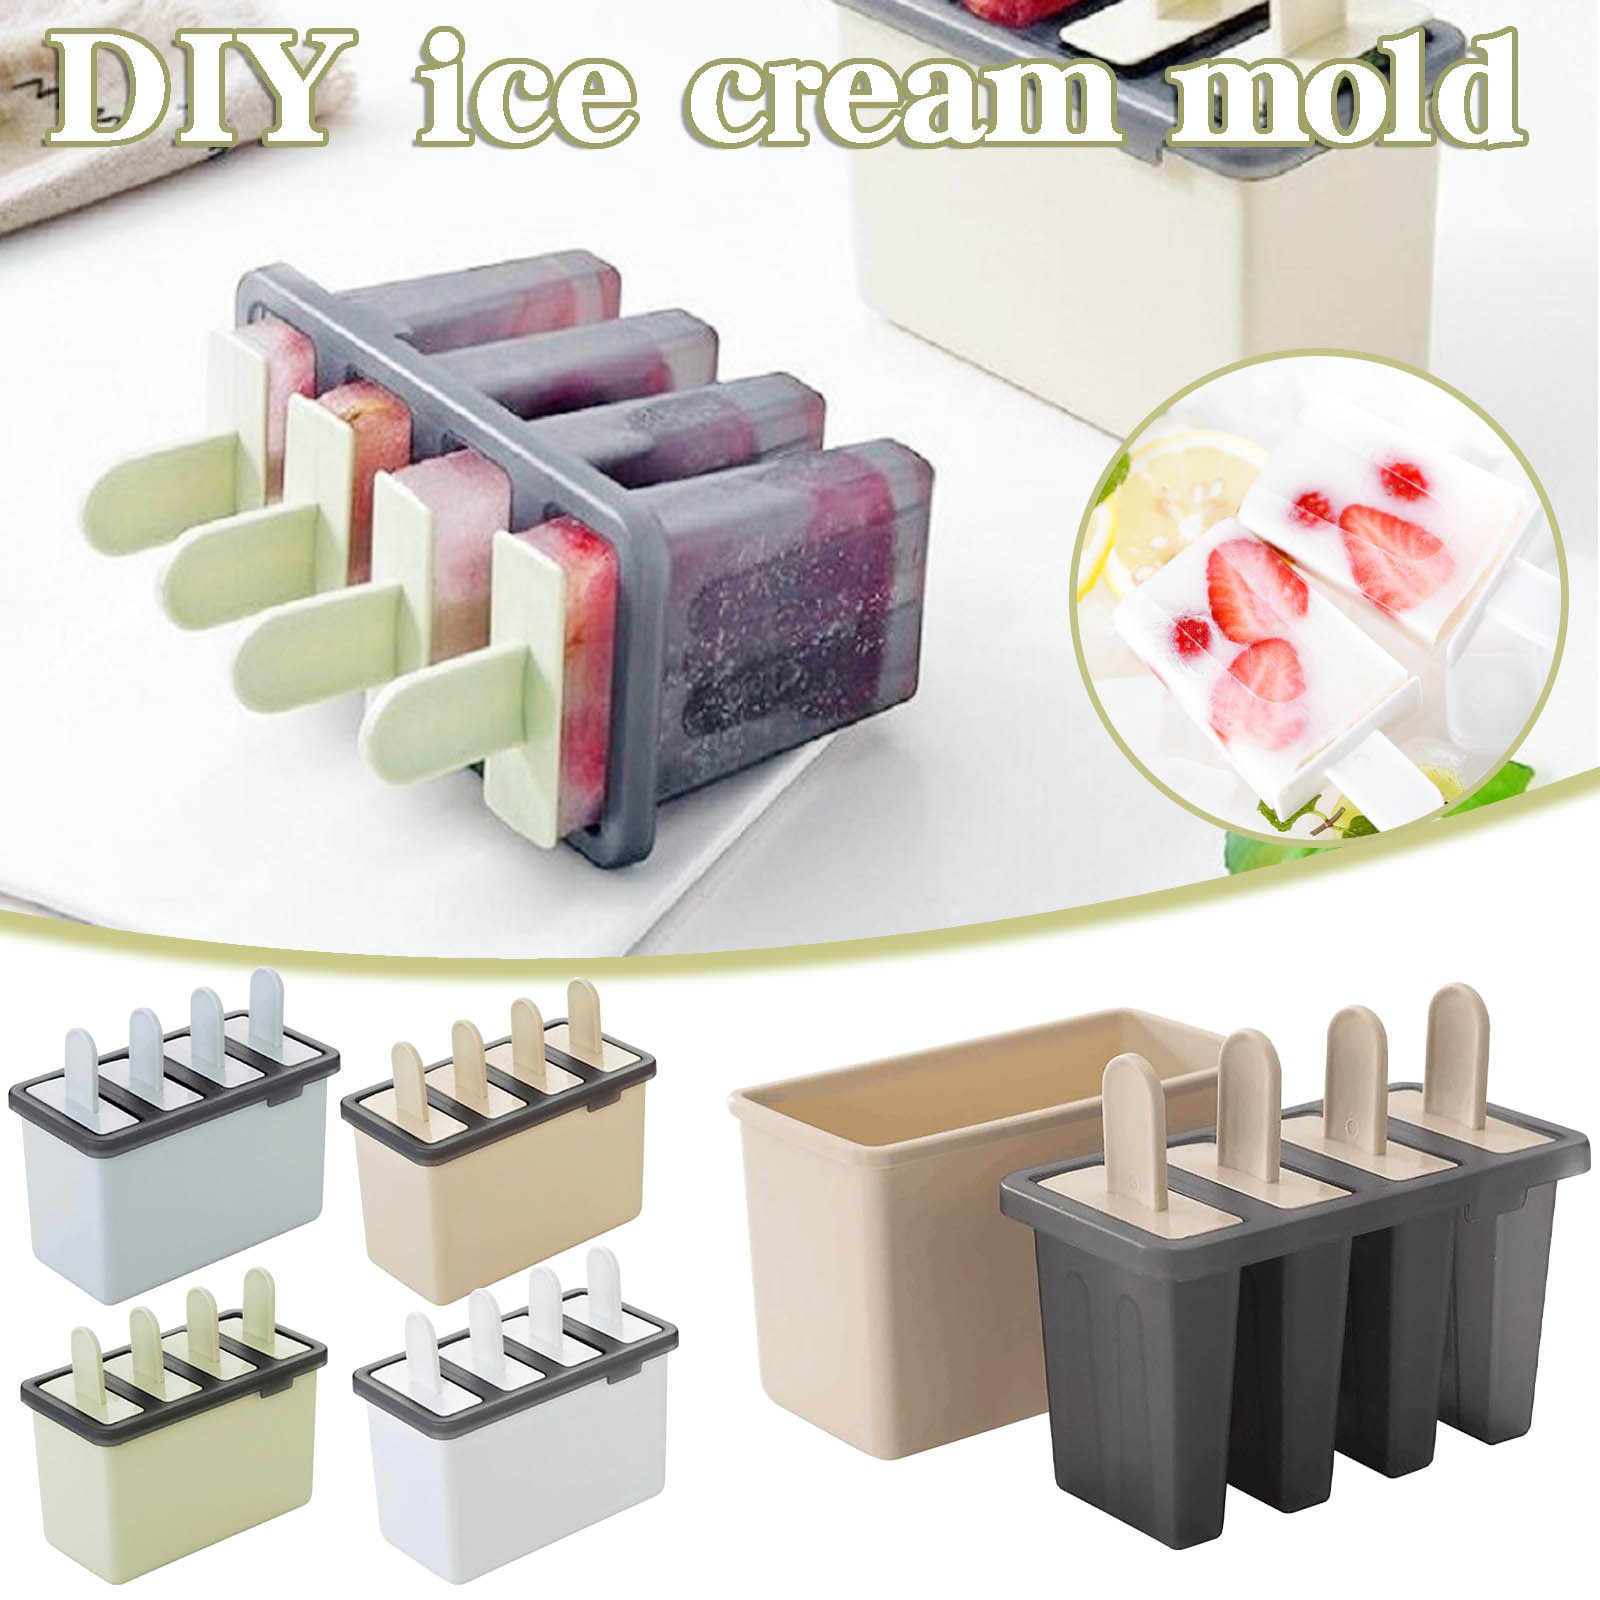 2021 NEW 1PC Silicone Ice Cream Mold Maker Cube Household Child Kitchen Dining Bar Gadget Mold Tools Accessories Supplies